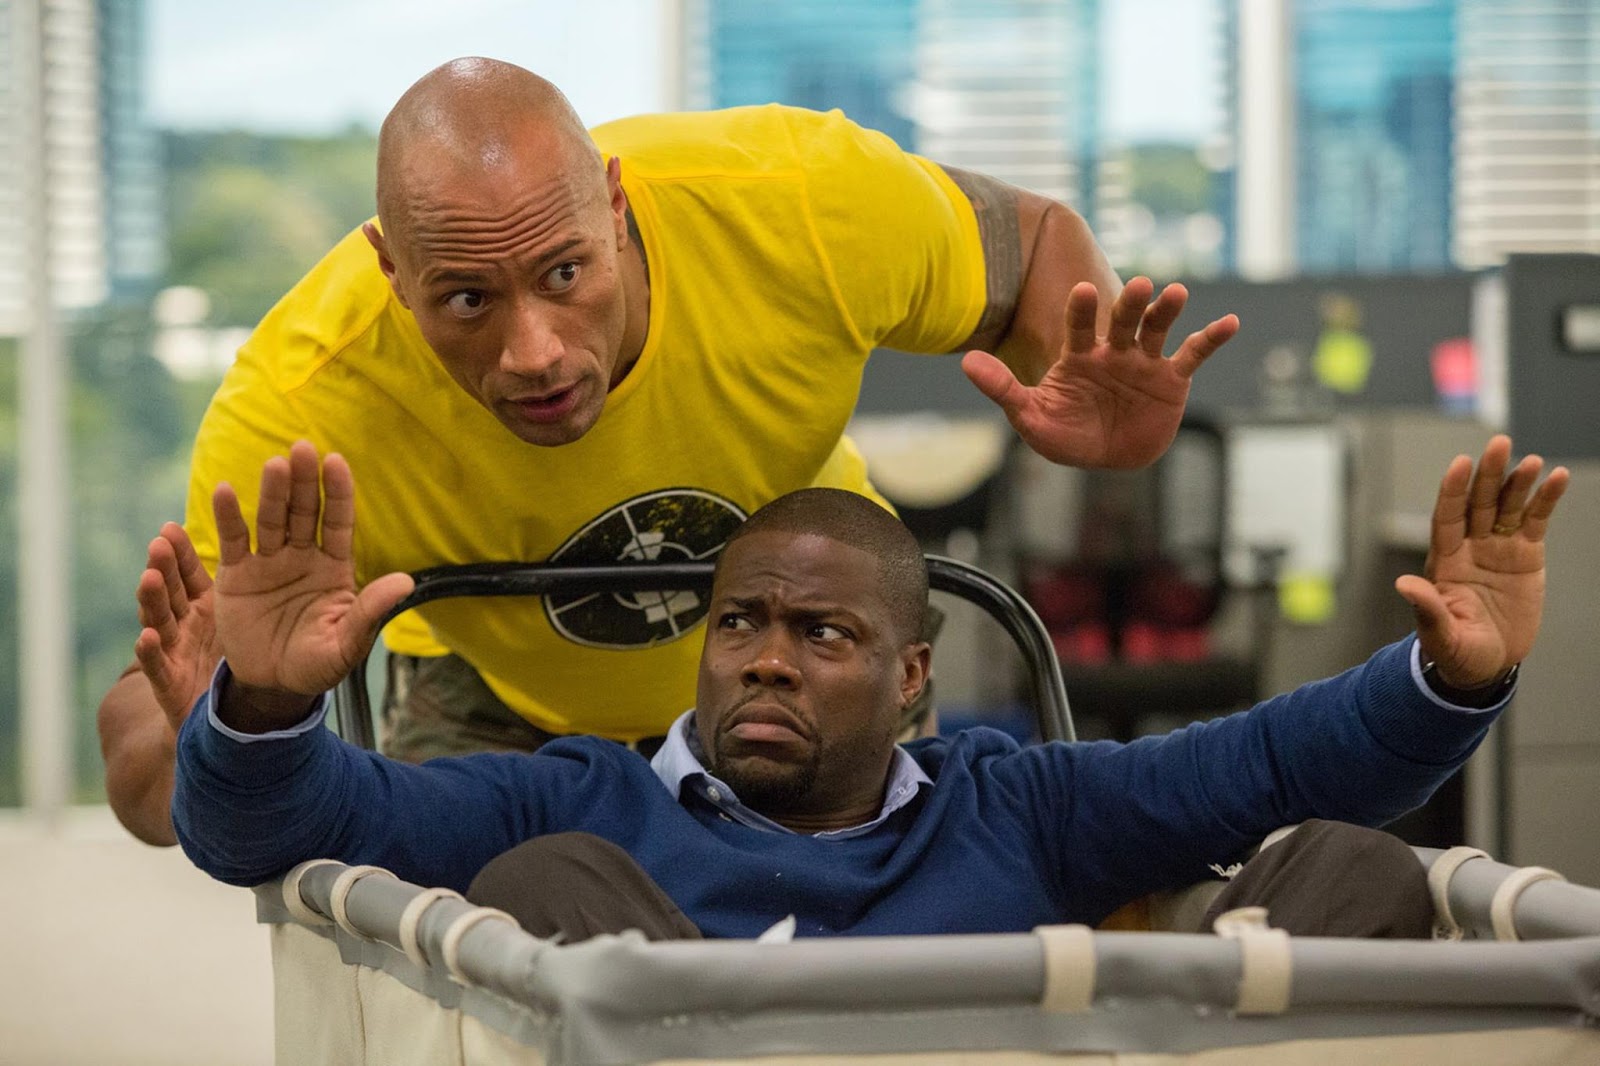 MOVIES: Central Intelligence - Review